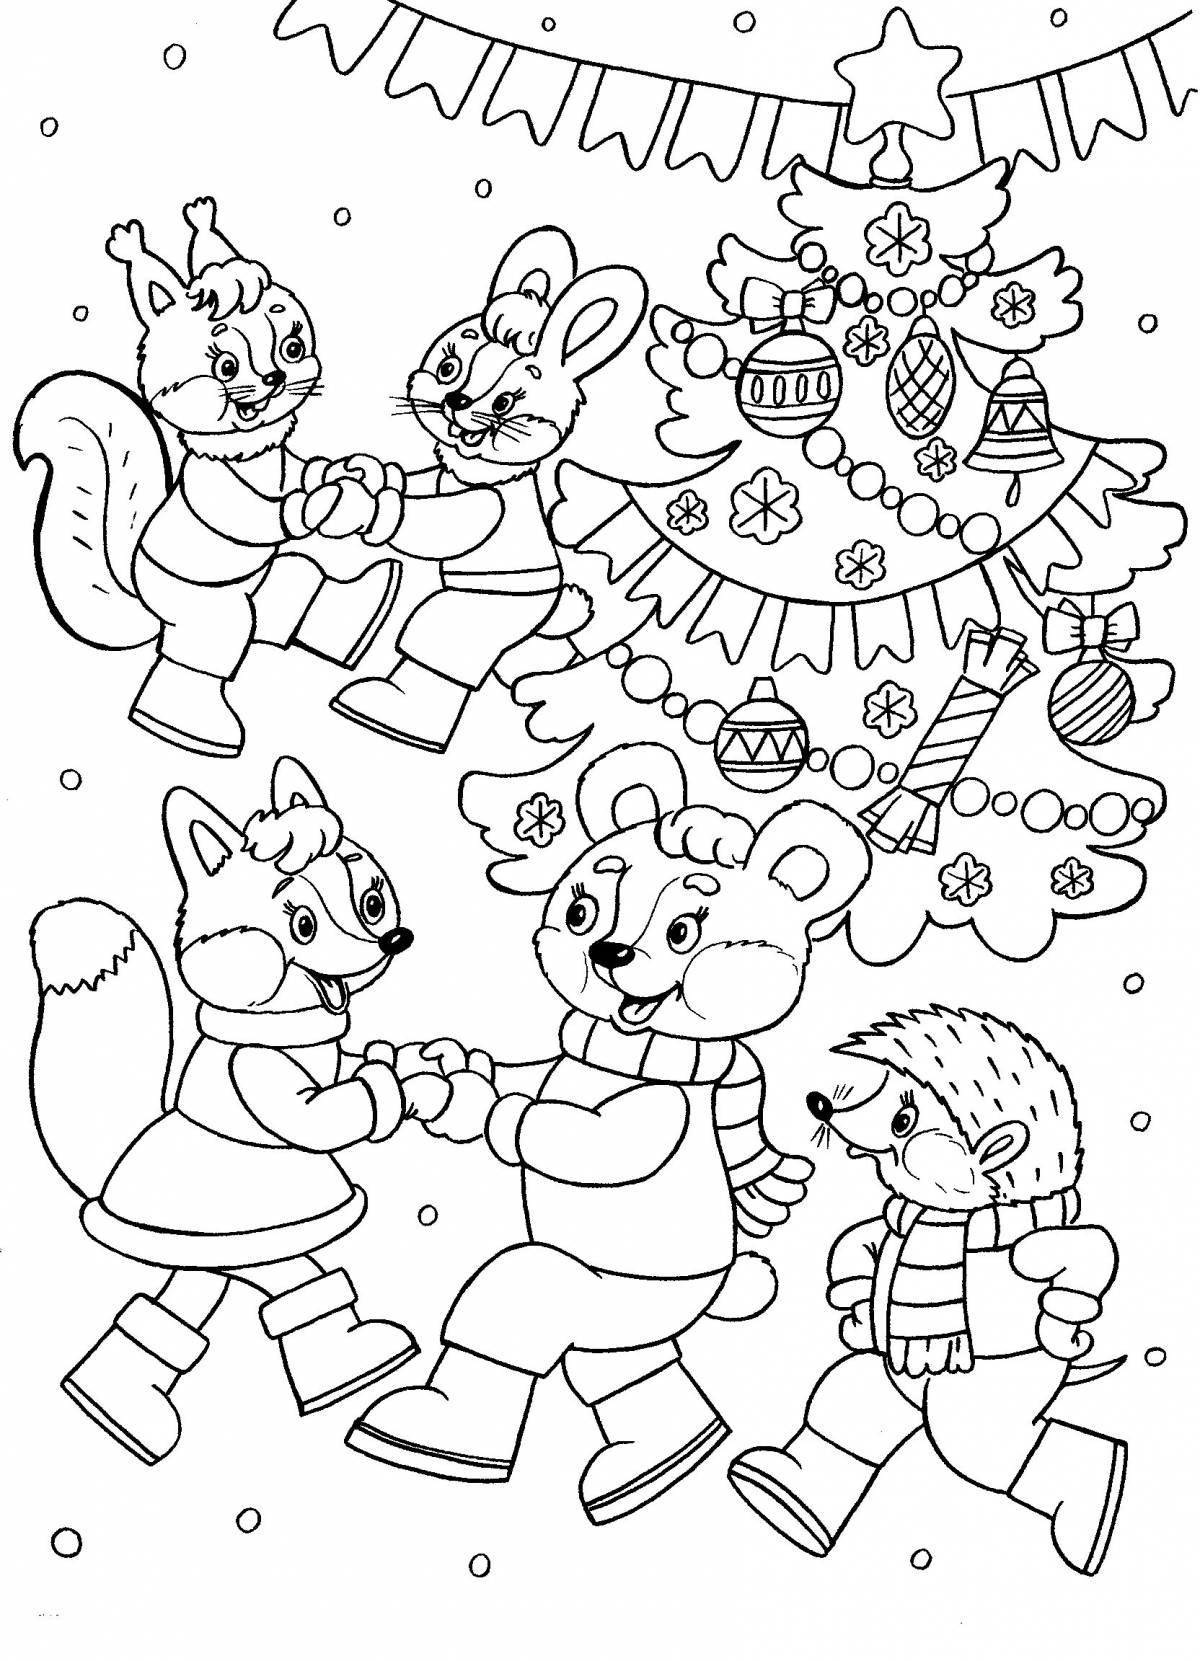 Coloring page elegant round dance around the tree